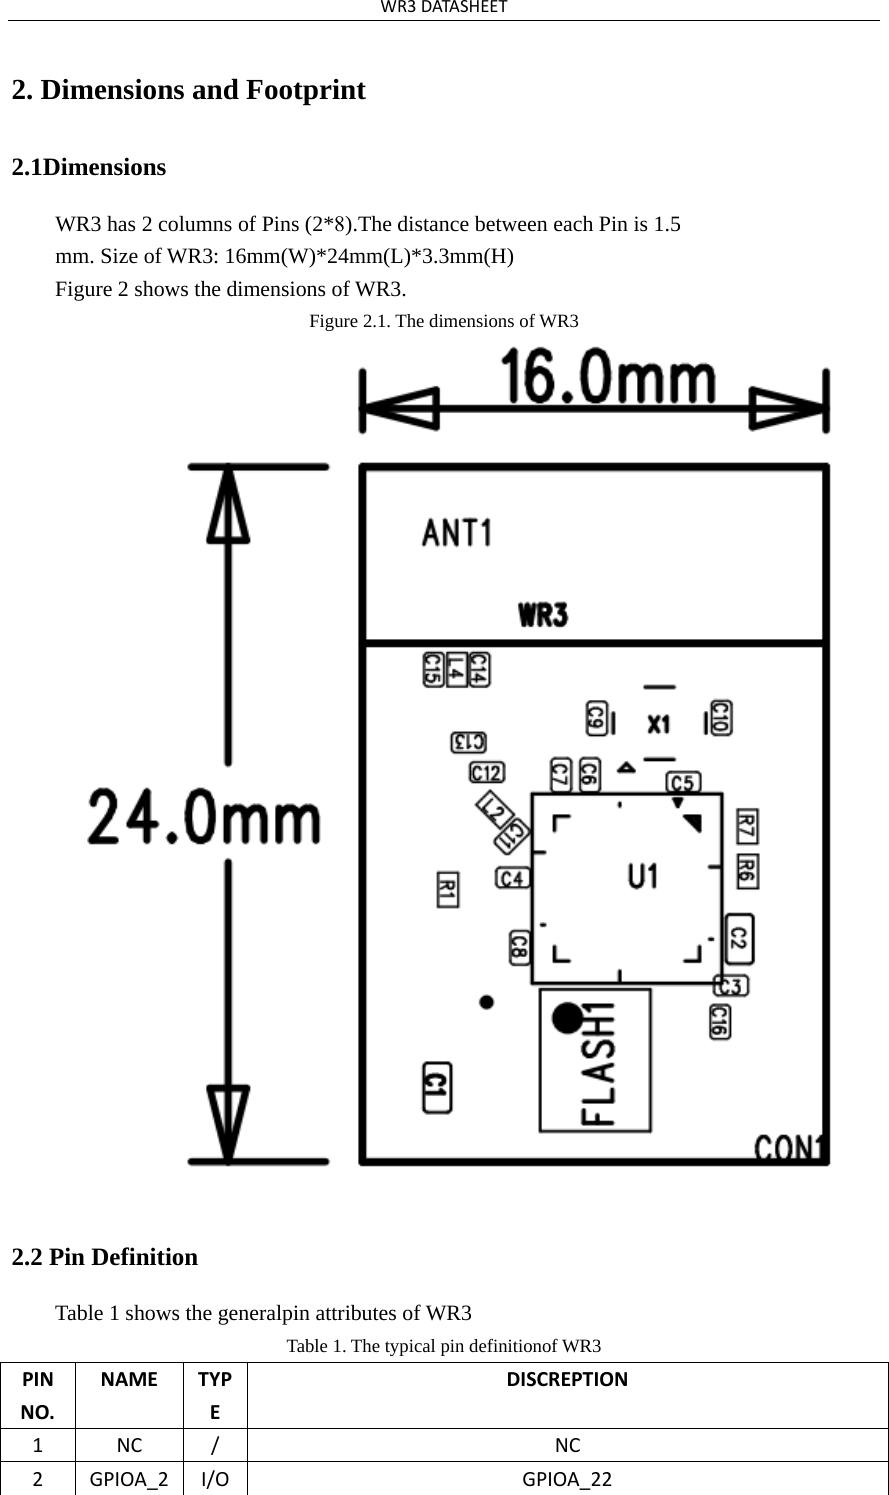 WR3DATASHEET2. Dimensions and Footprint2.1Dimensions WR3 has 2 columns of Pins (2*8).The distance between each Pin is 1.5 mm. Size of WR3: 16mm(W)*24mm(L)*3.3mm(H) Figure 2 shows the dimensions of WR3. Figure 2.1. The dimensions of WR3 2.2 Pin Definition Table 1 shows the generalpin attributes of WR3 Table 1. The typical pin definitionof WR3 PINNO.NAMETYPEDISCREPTION1NC/NC2GPIOA_2 I/OGPIOA_22